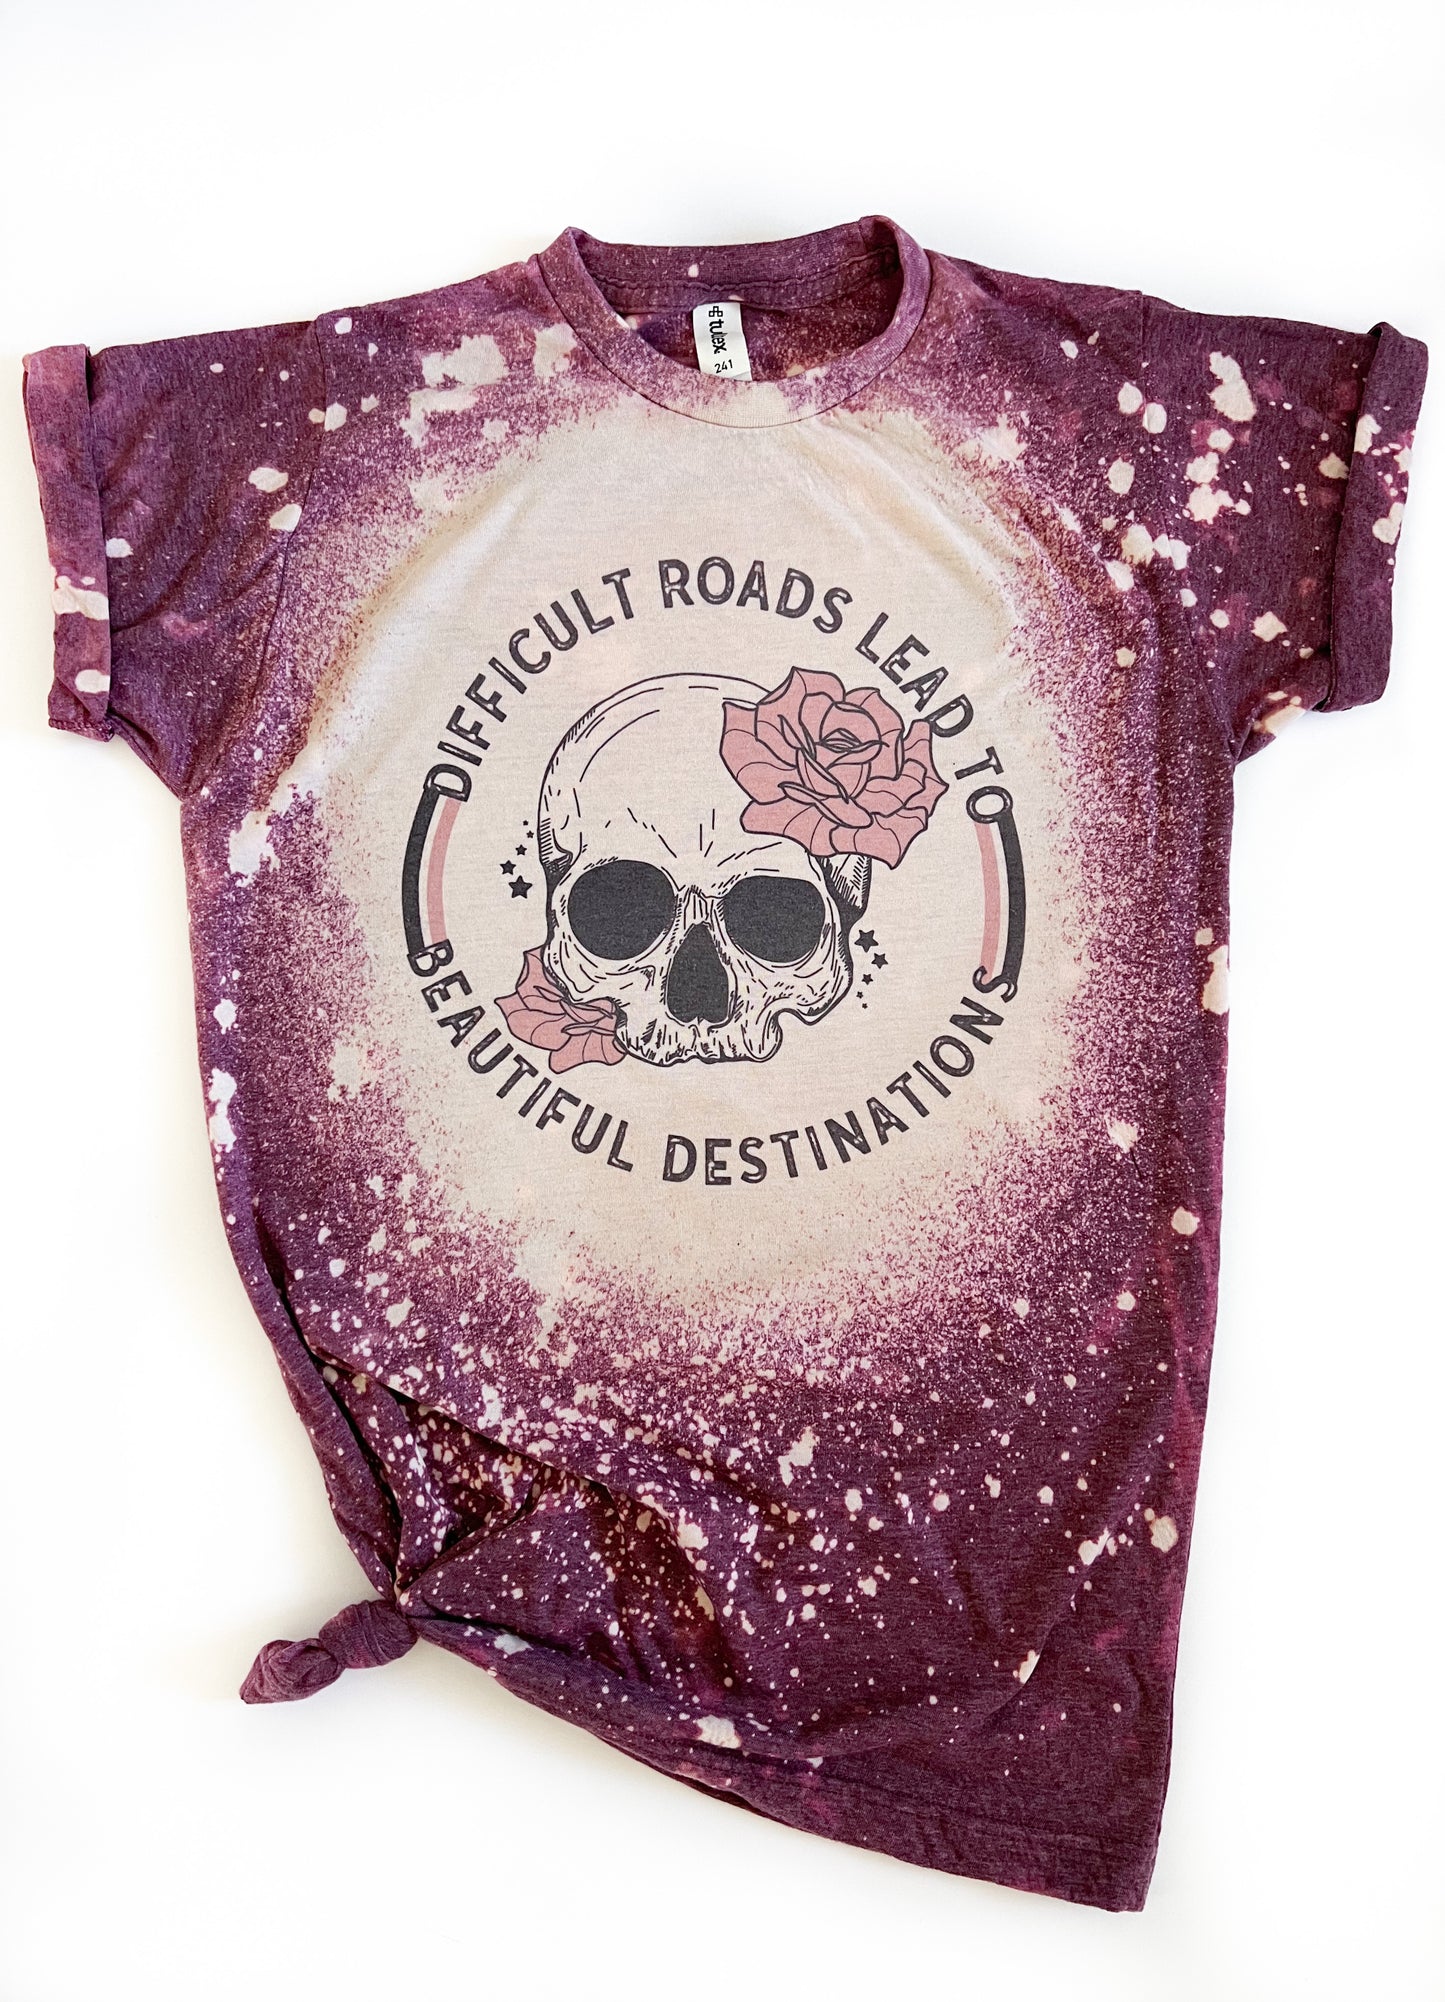 Difficult Roads Lead To Beautiful Destinations Bleached Tee